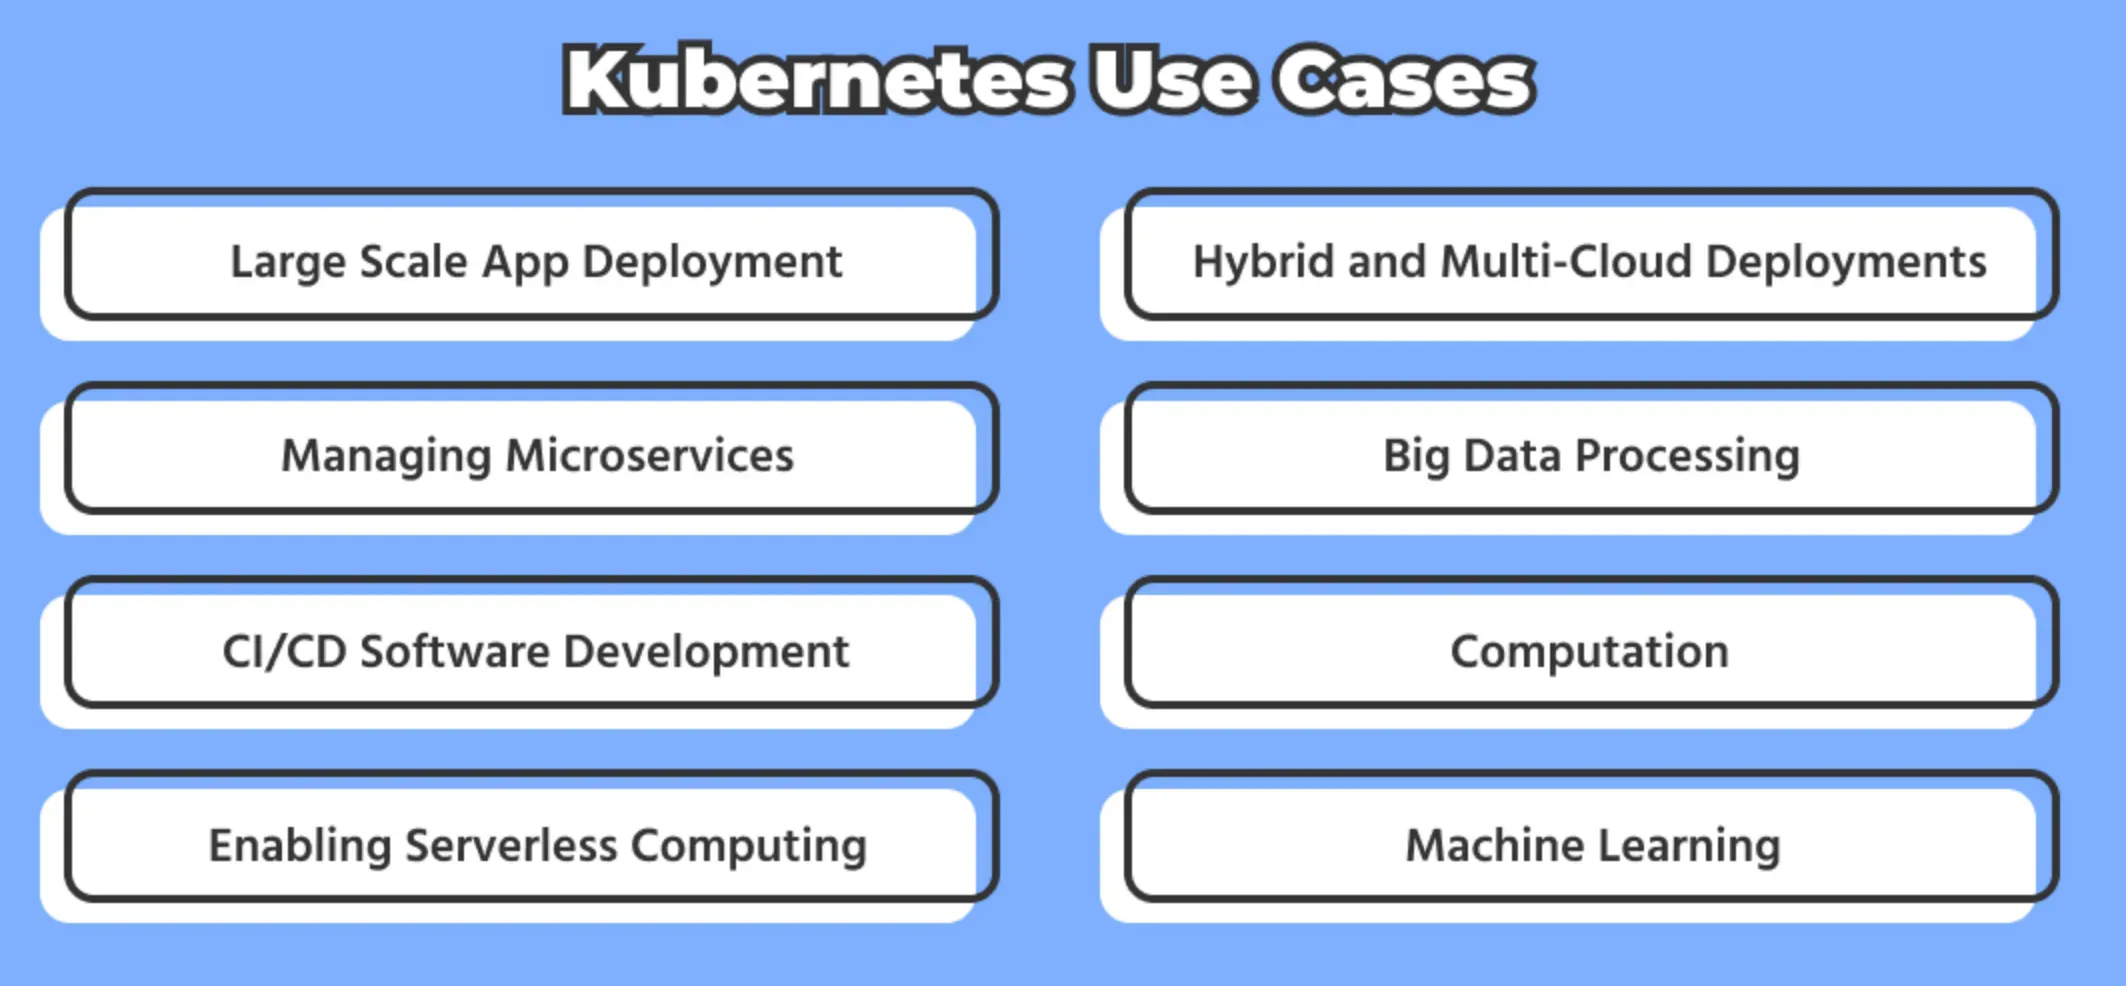 Popular Use Cases of Containers of Kubernetes